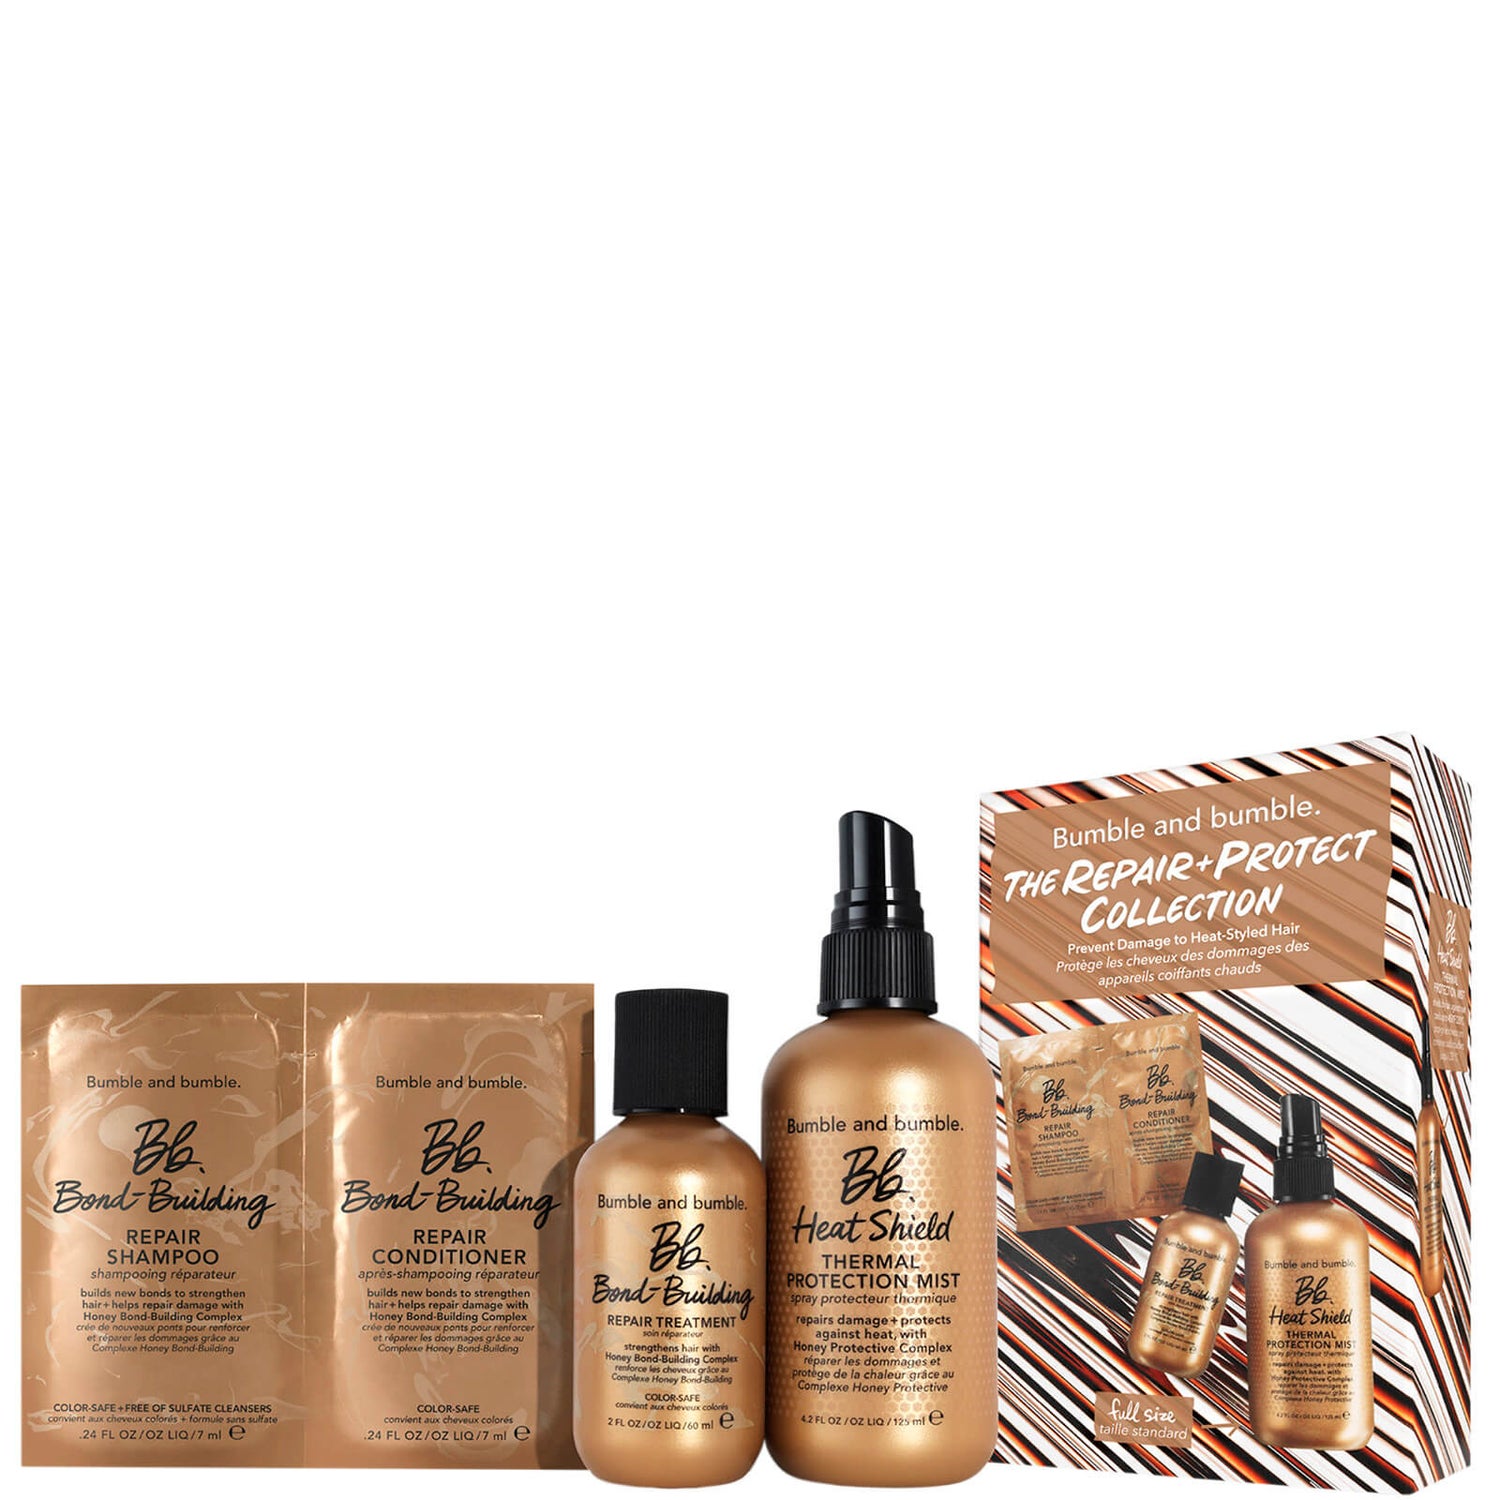 Bumble and bumble The Repair and Protect Set (Worth £45.00)